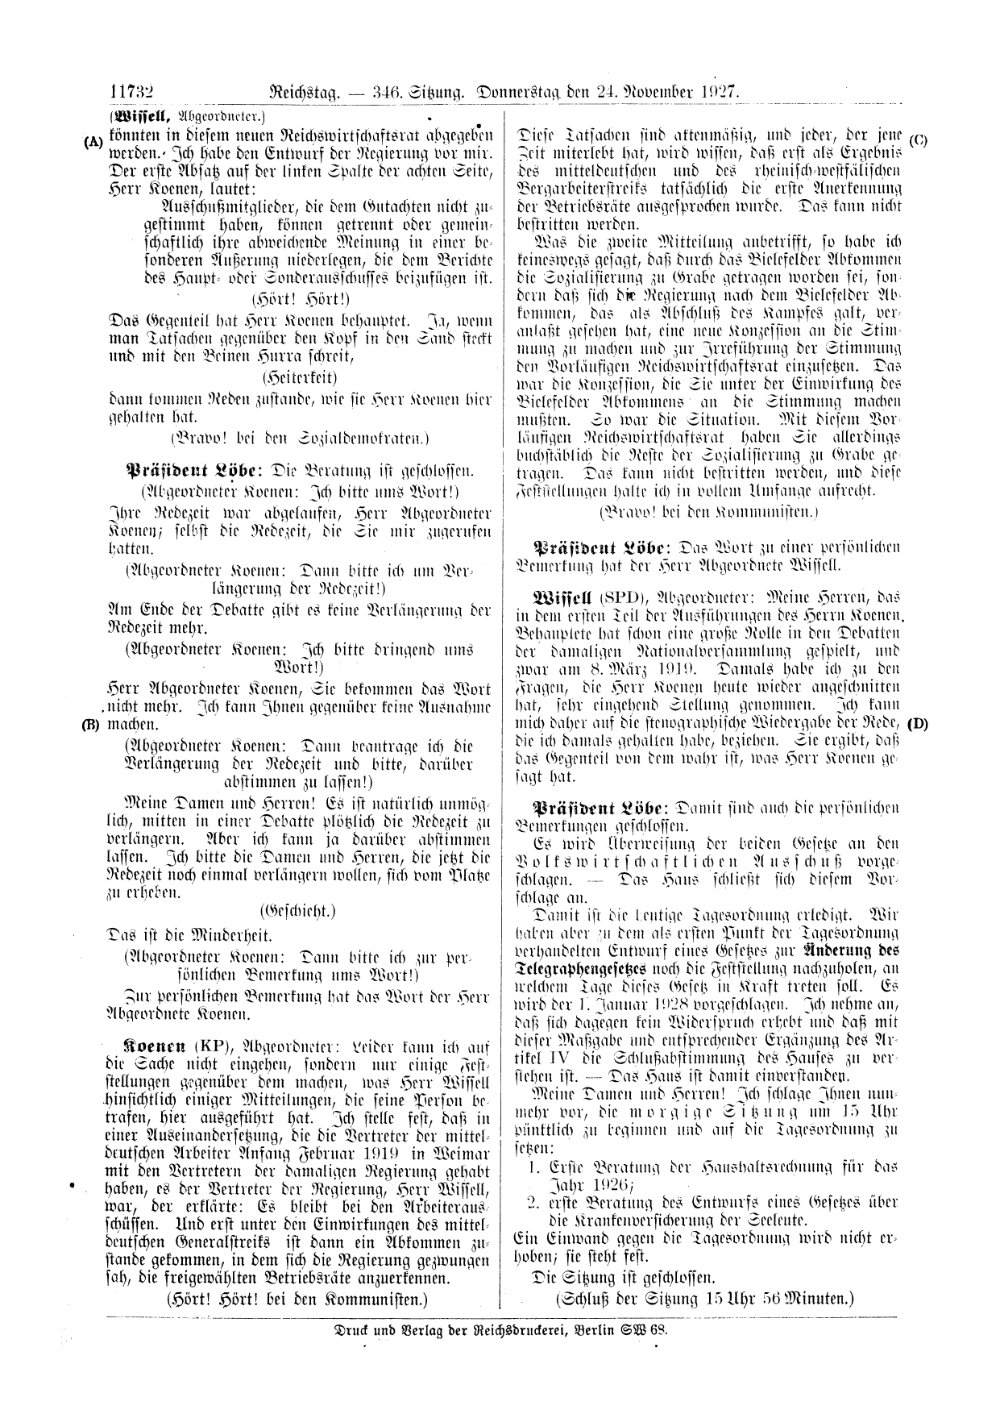 Scan of page 11732